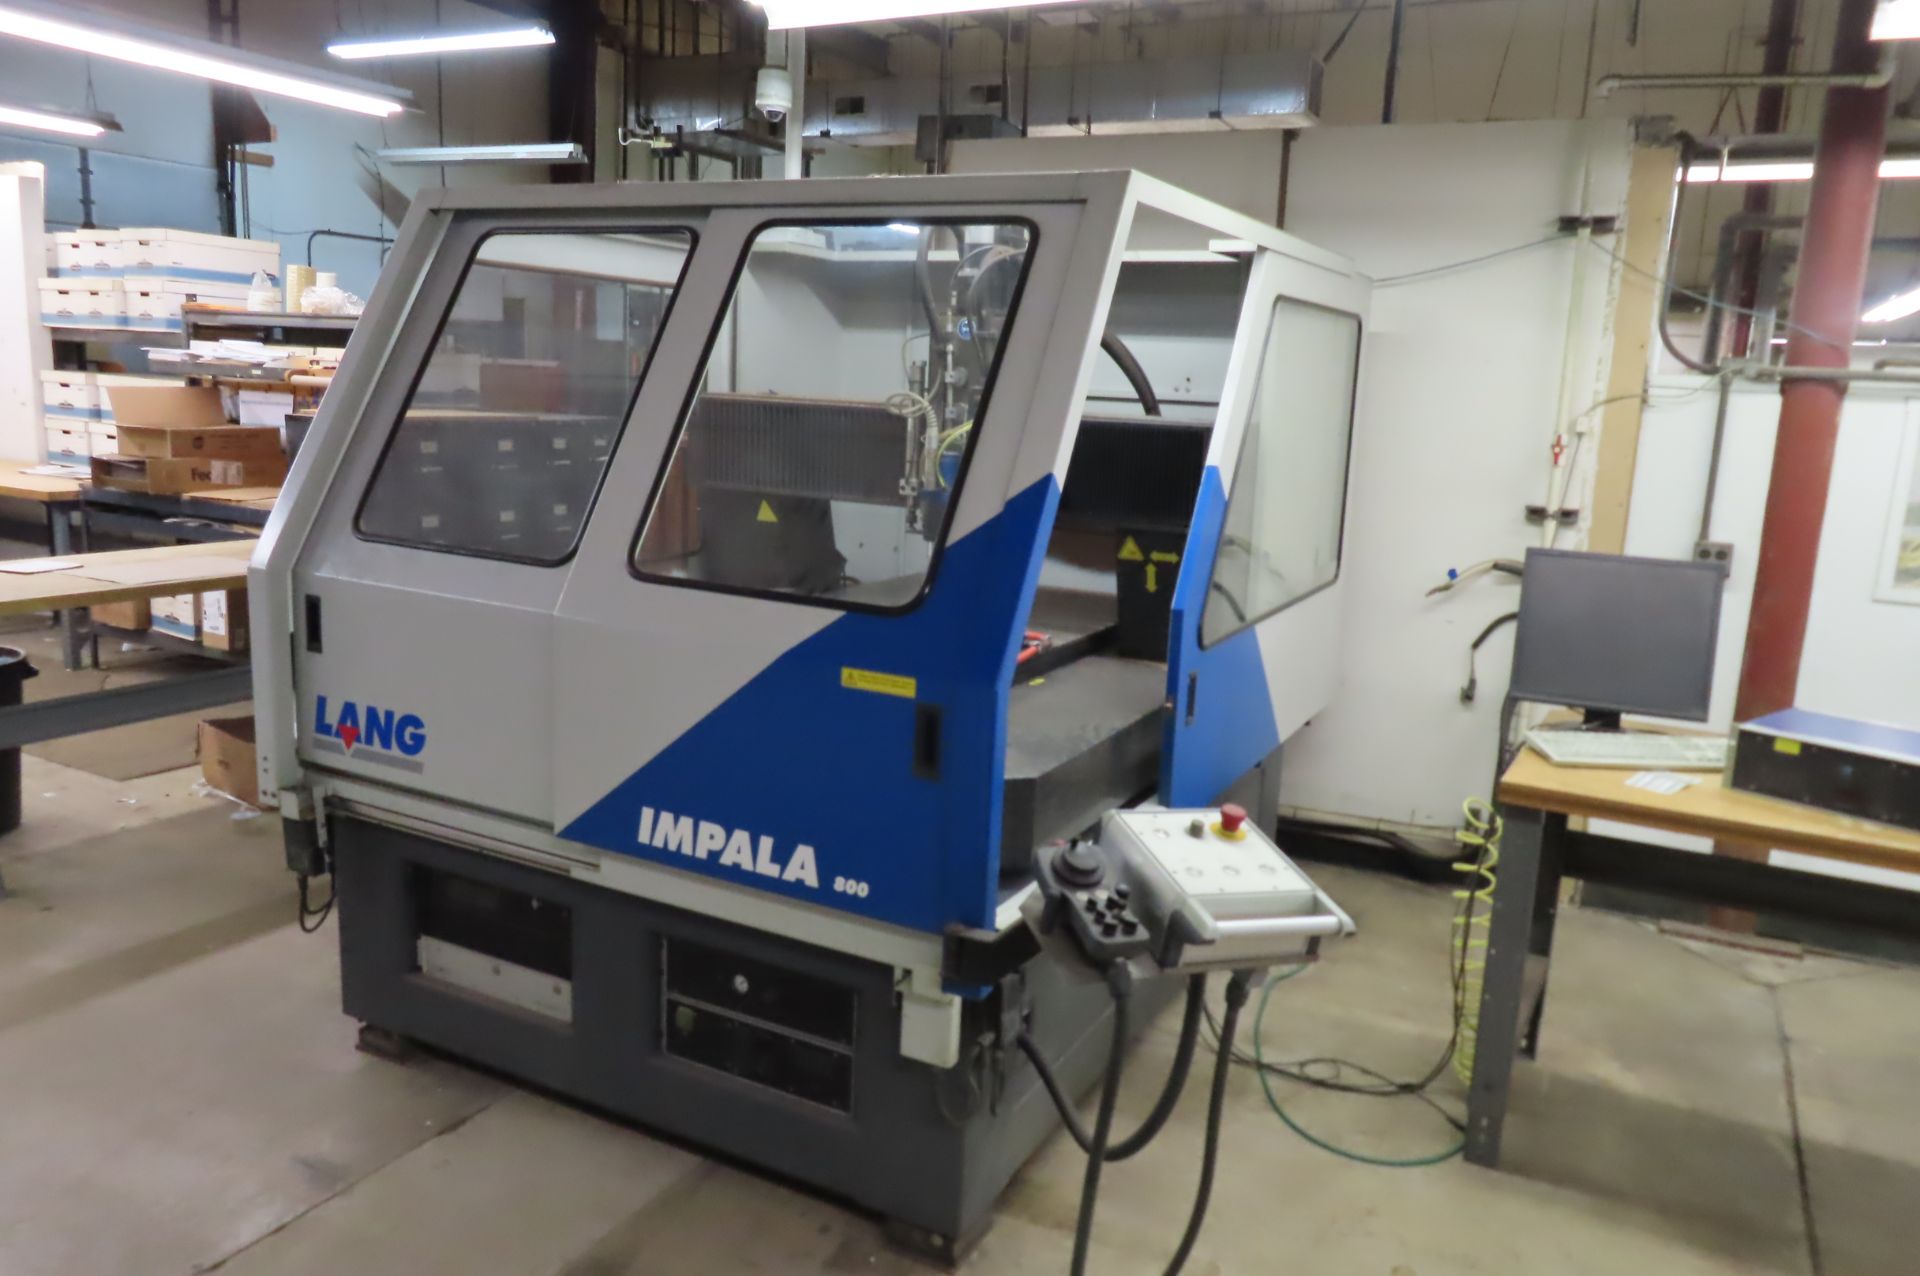 2007 LANG IMPALA 800 CNC ENGRAVING AND MILLING MACHINE, S/N 0709-H530-58, 3 AXIS, X-31 IN... - Image 11 of 16